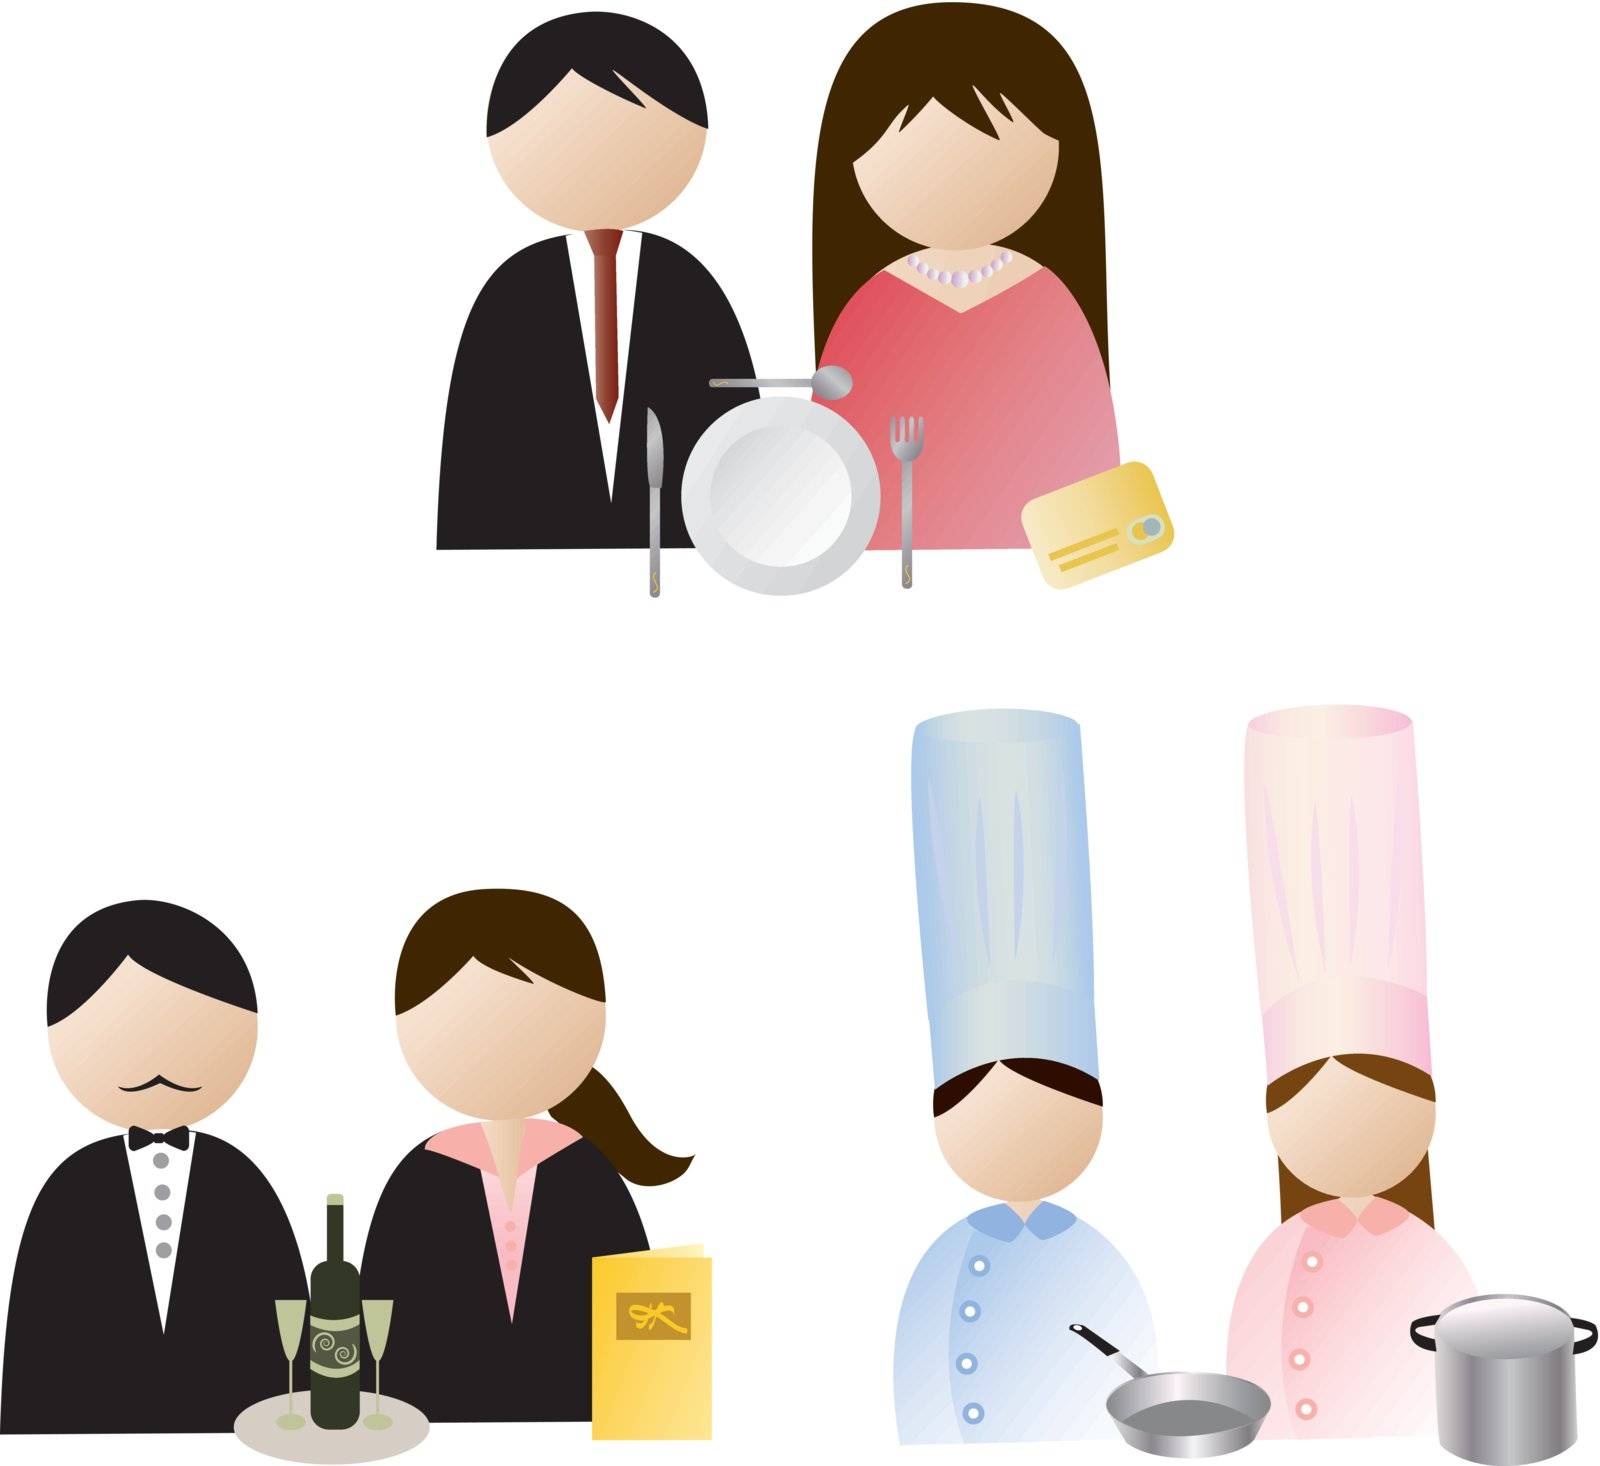 Avatar or icons for restaurant people such as customer, server, and chef both male and female version